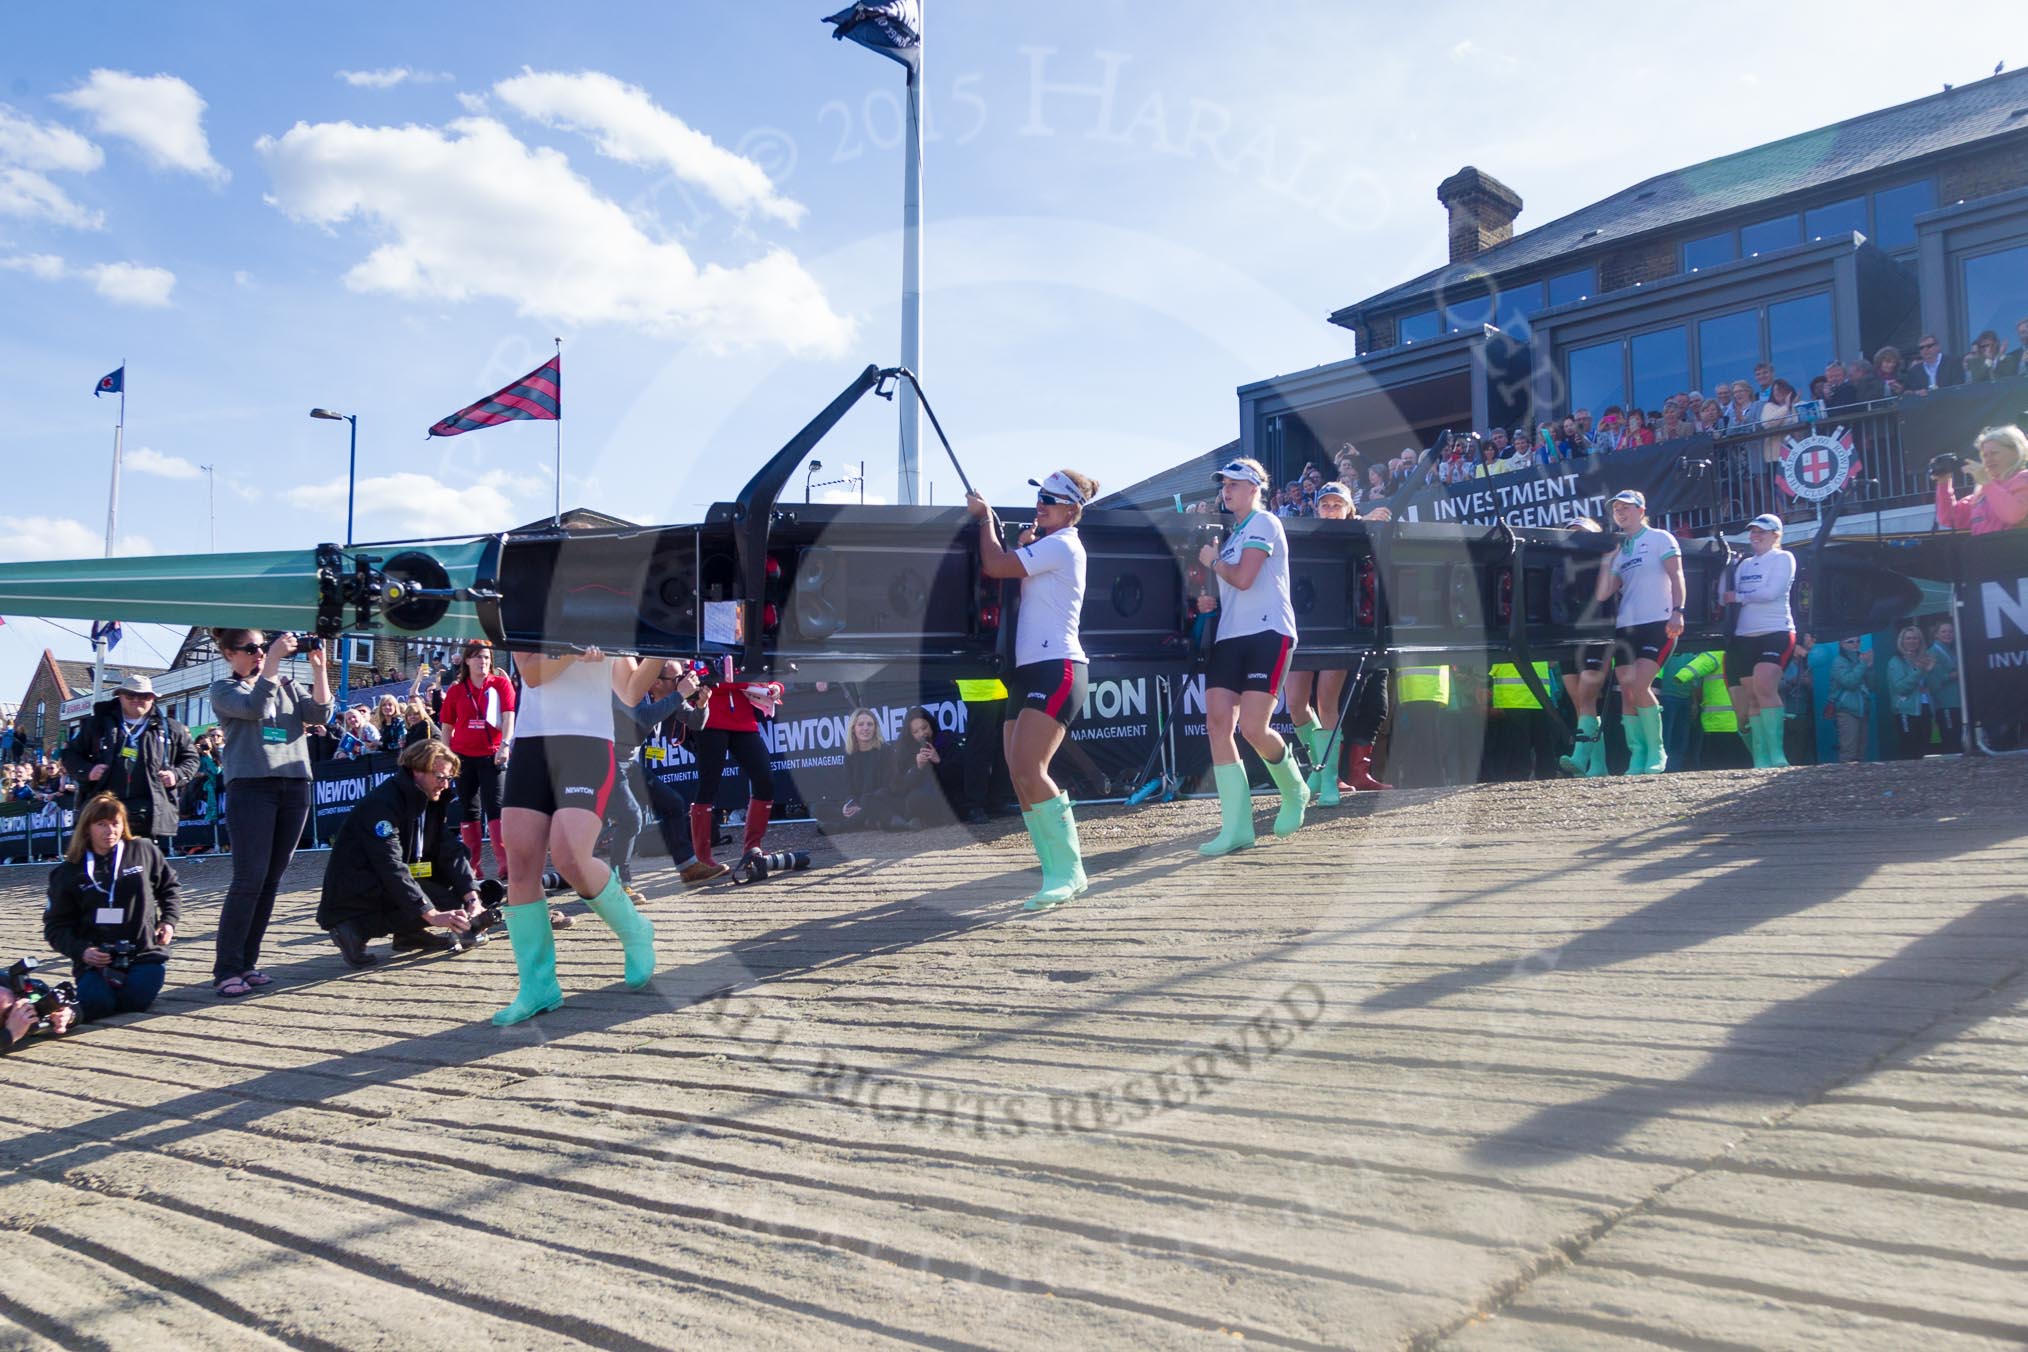 The Boat Race season 2015 - Newton Women's Boat Race.
River Thames between Putney and Mortlake,
London,

United Kingdom,
on 11 April 2015 at 16:02, image #73